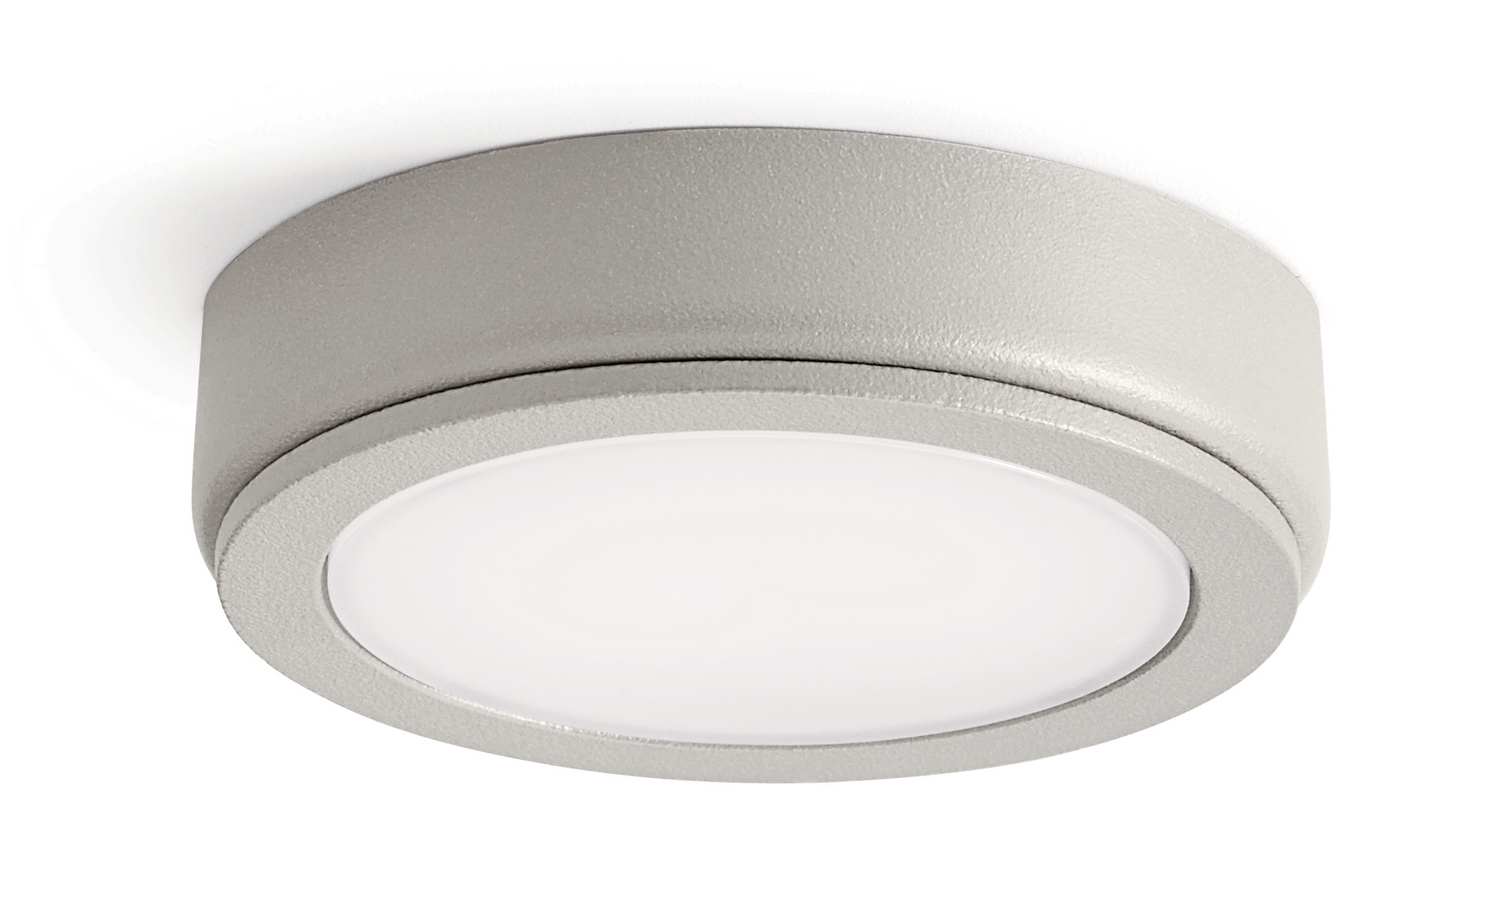 Led Disc From The 4D Series 12V Led Disc Collection By pour Kichler Disk Light